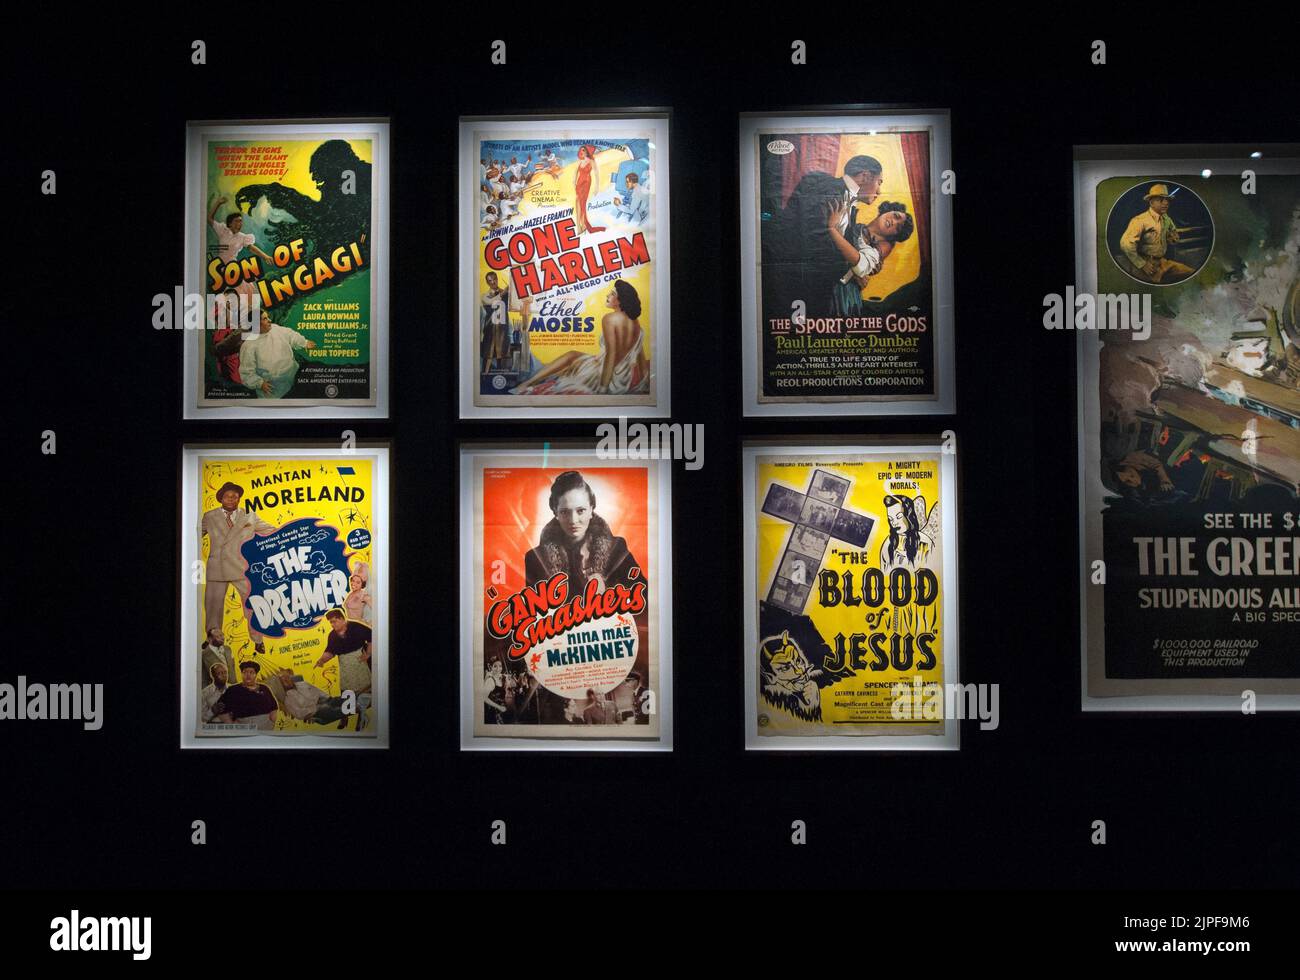 Vintage posters on display in the exhibtion 'Regeneration: Black Cinema' at the Academy Museum of Motion Pictures in Los Angeles, California Stock Photo